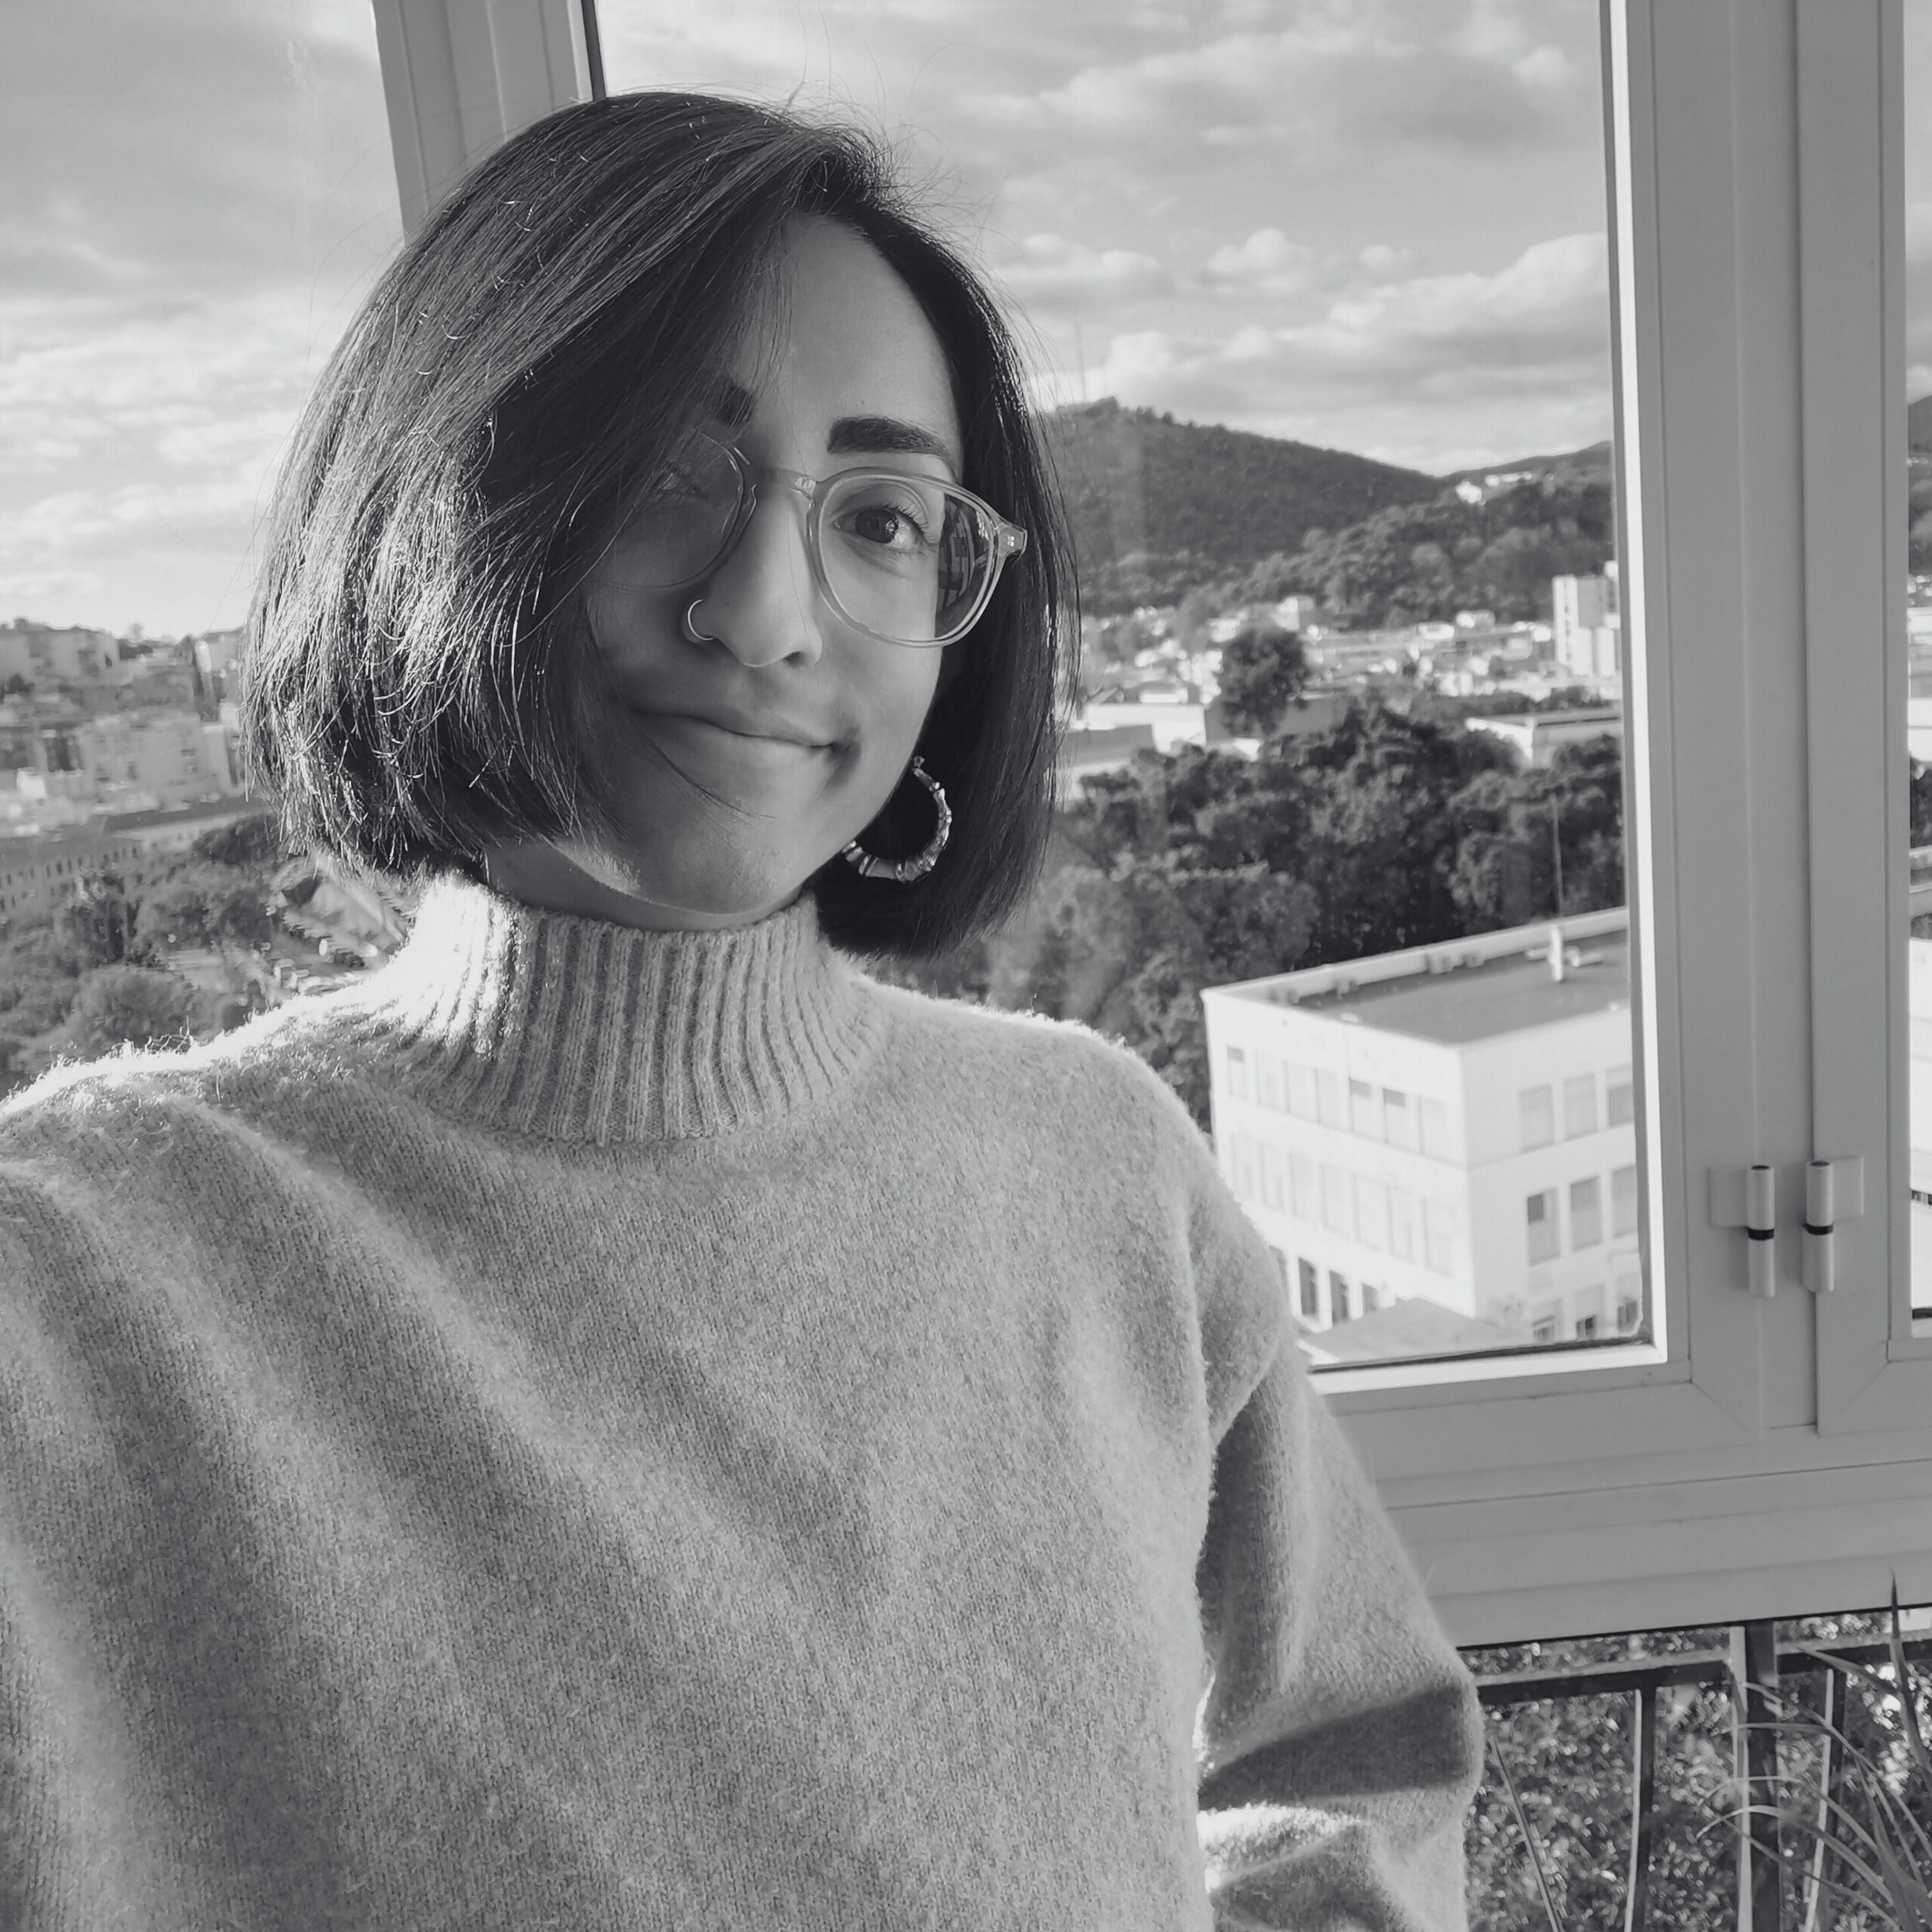 Henna wears a turtleneck jumper, gold hoops, nose ring and goggle like glasses. They’re standing on a balcony in Malaga with buildings and lush mountains behind. They’re smiling and looking into the camera.